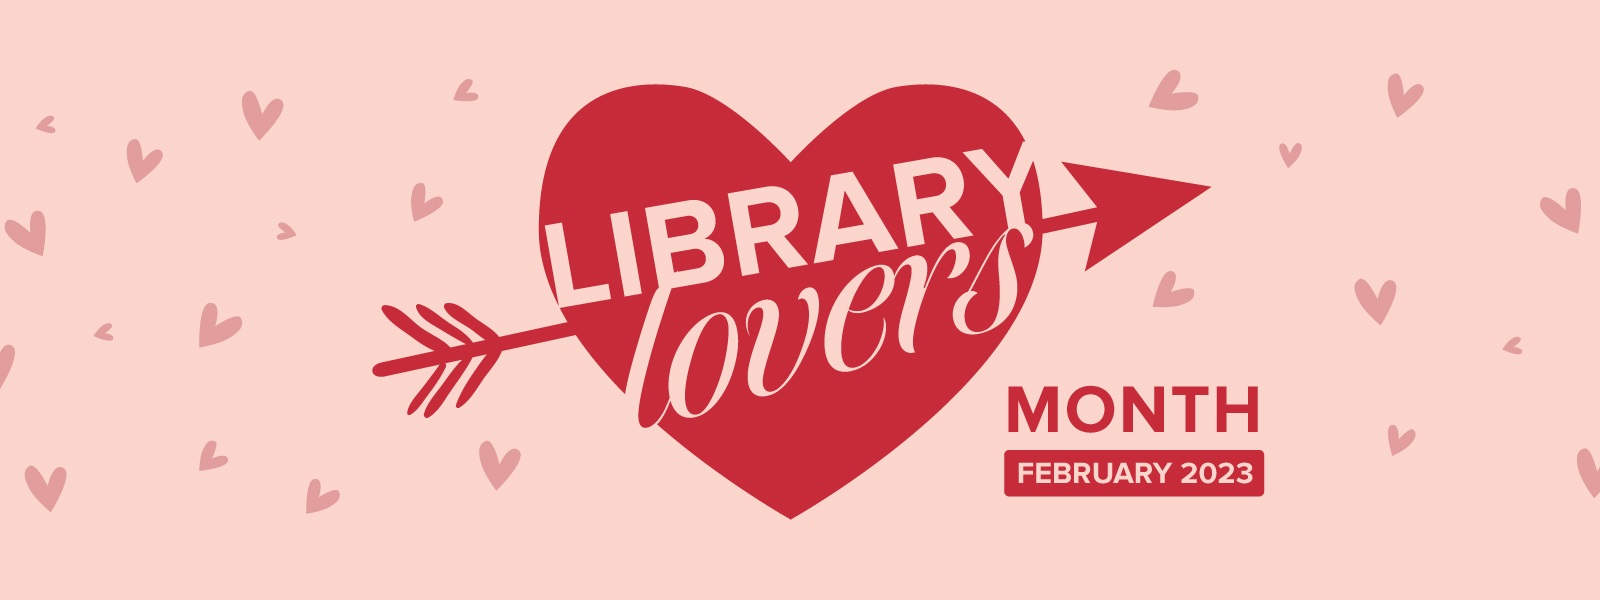 Library Lovers Month February 2023 banner